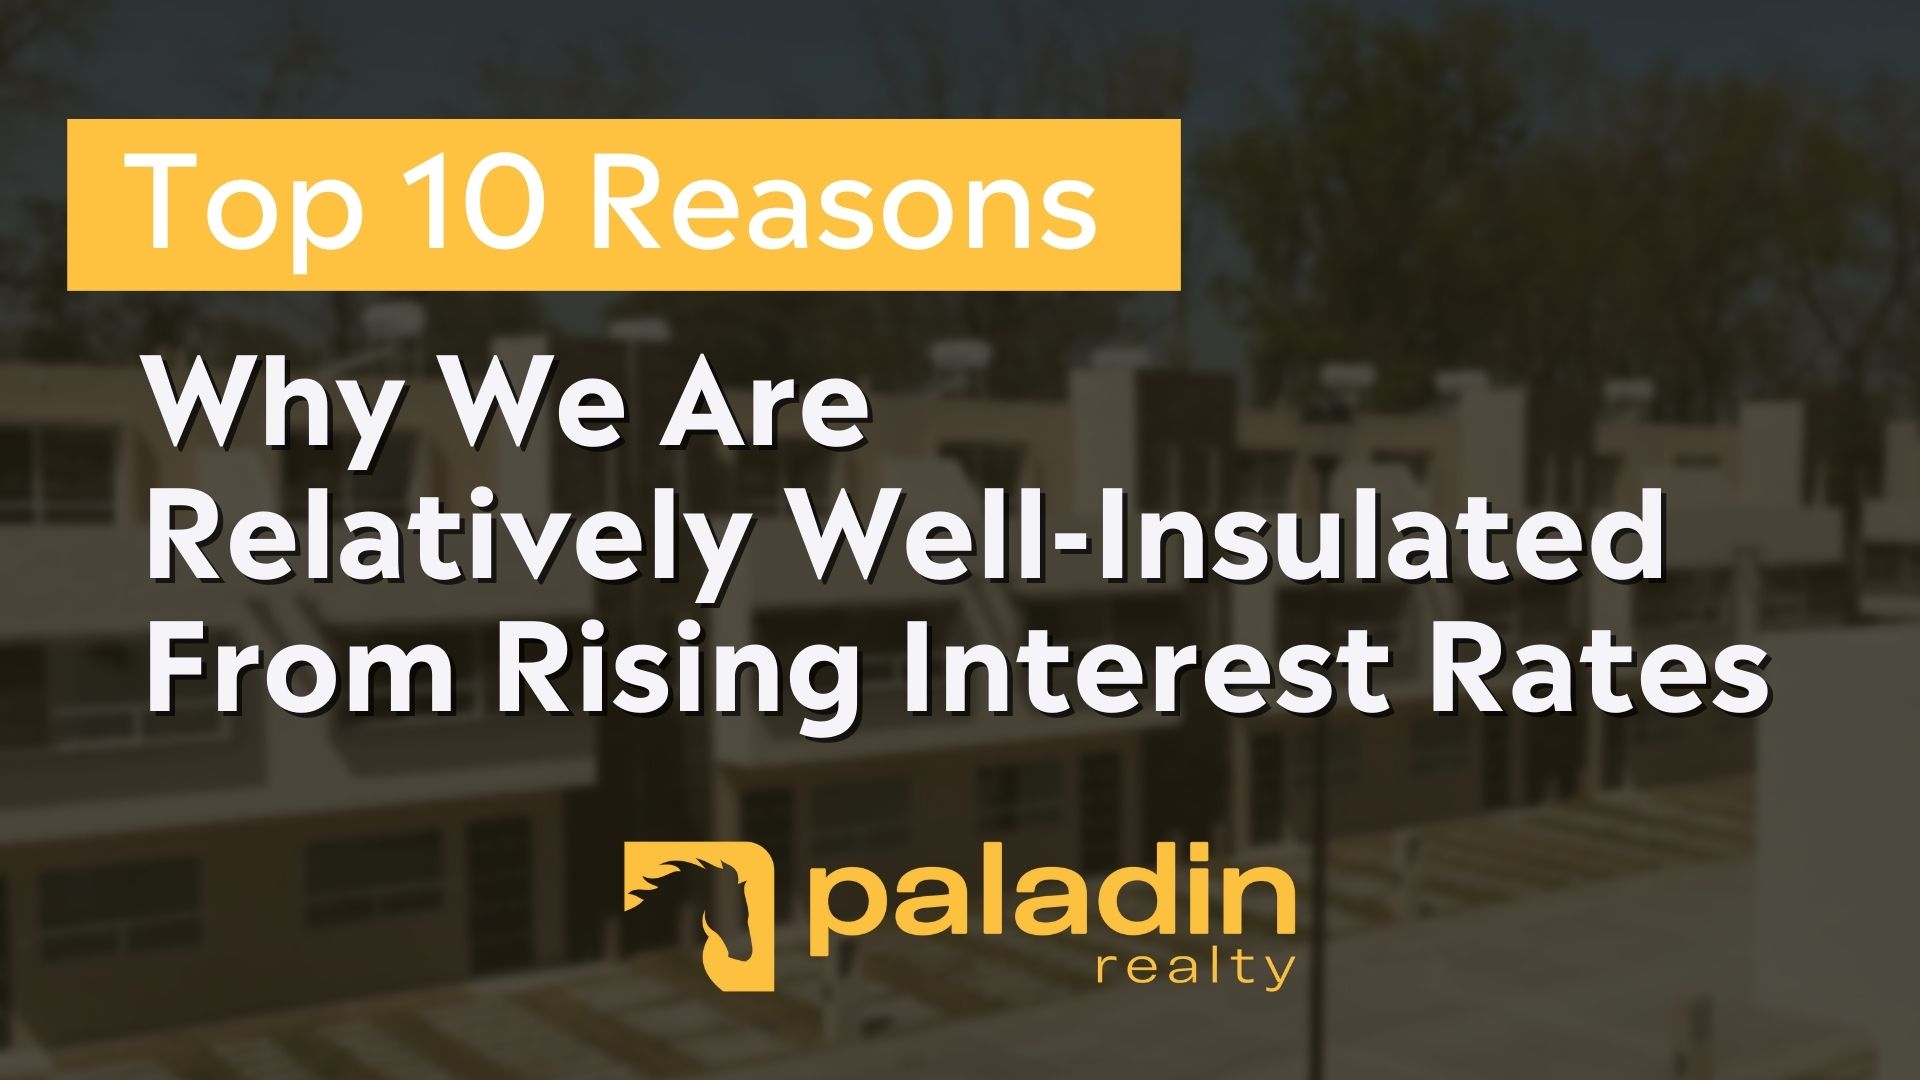 FI [Web] - Top 10 Reasons Why We Are Relatively Well Insulated From Rising Interest Rates